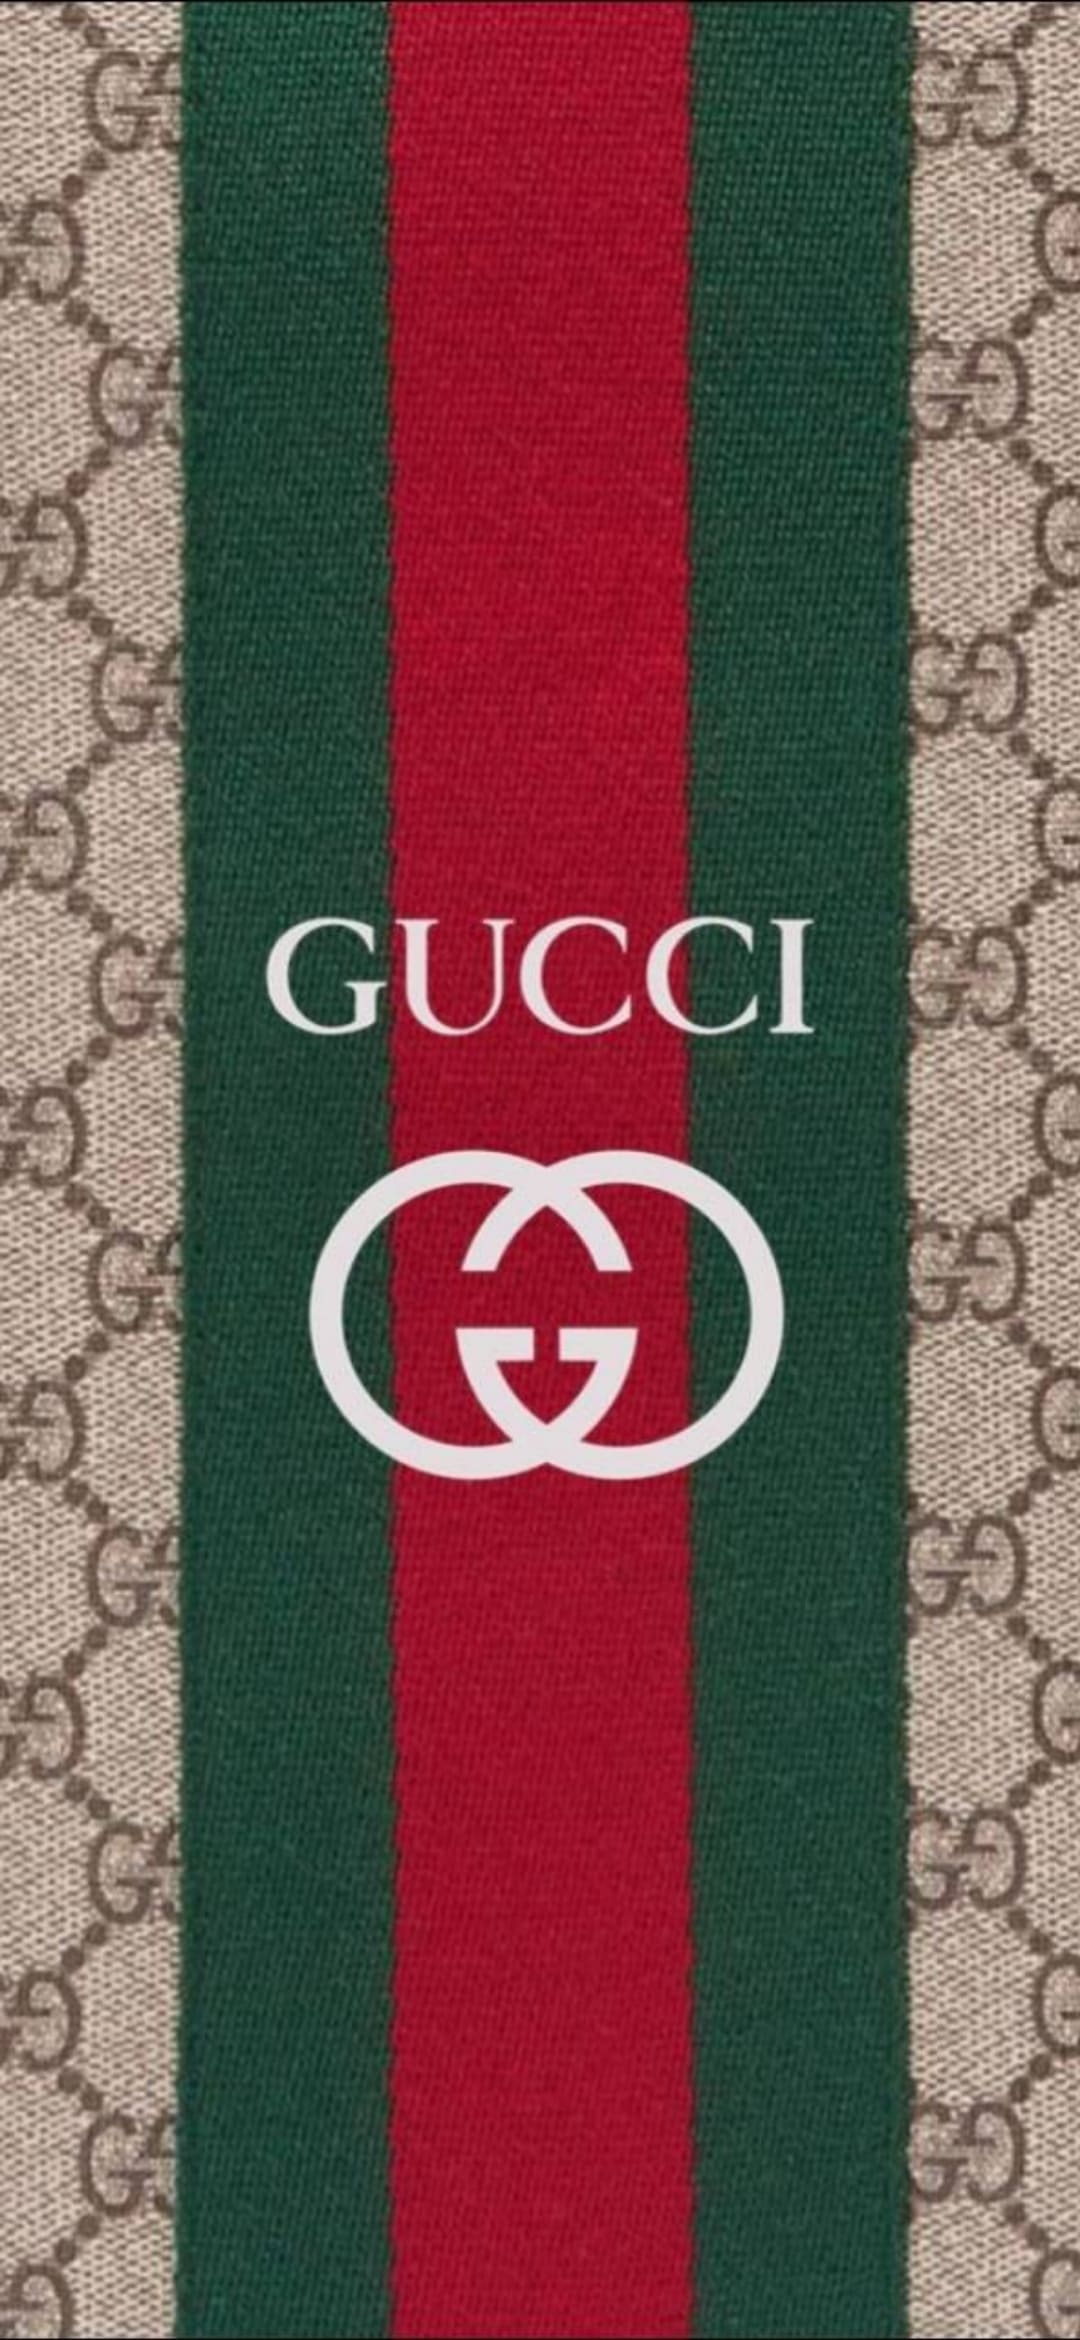 Gucci Backgrounds